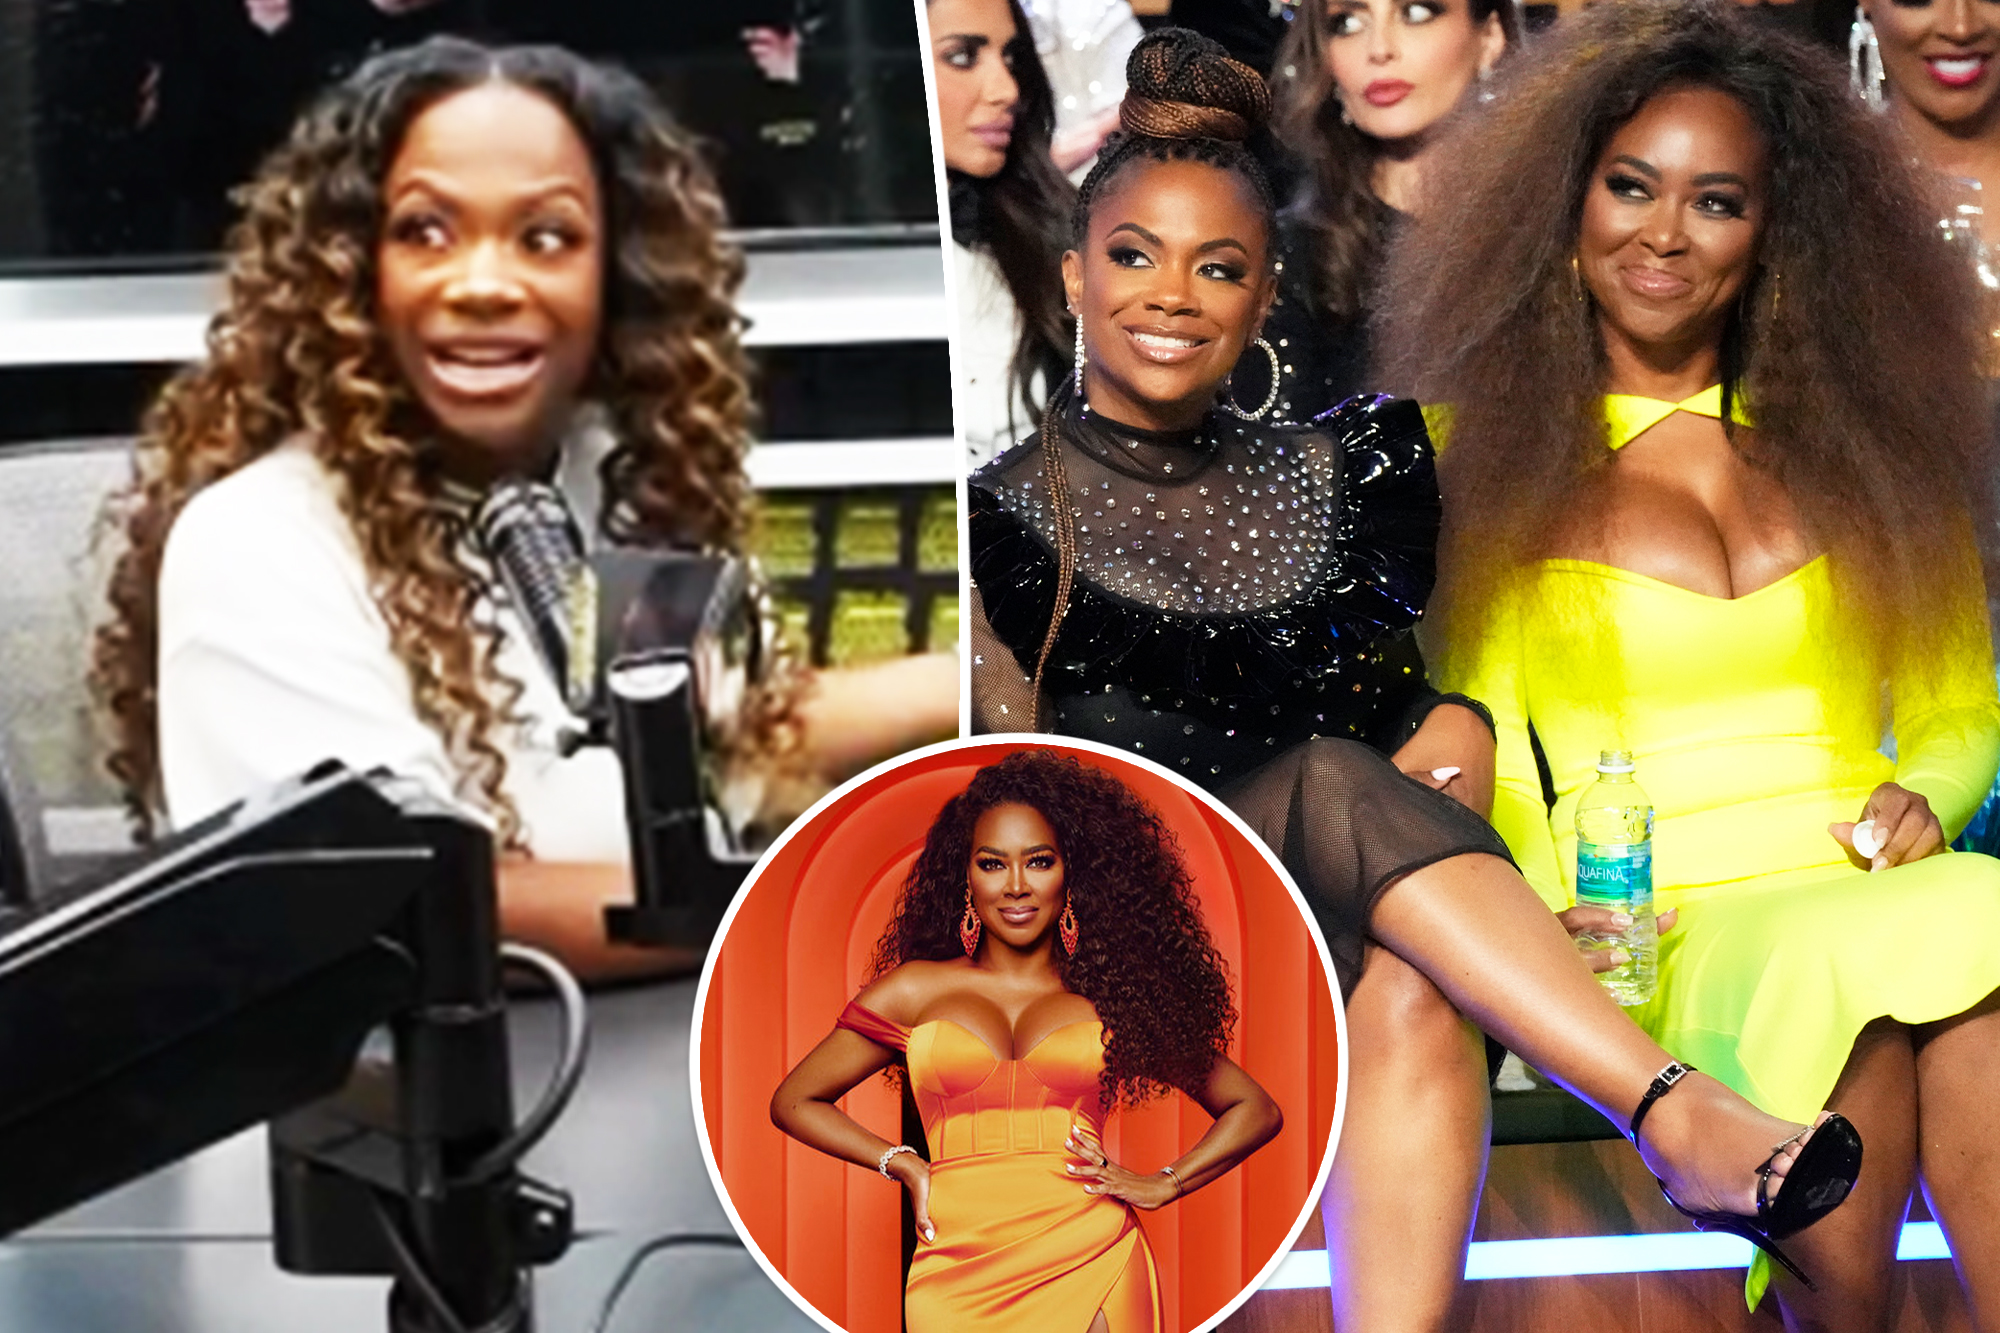 Kandi Burruss Defends Kenya Moore: The Real Housewives Drama Unleashed!